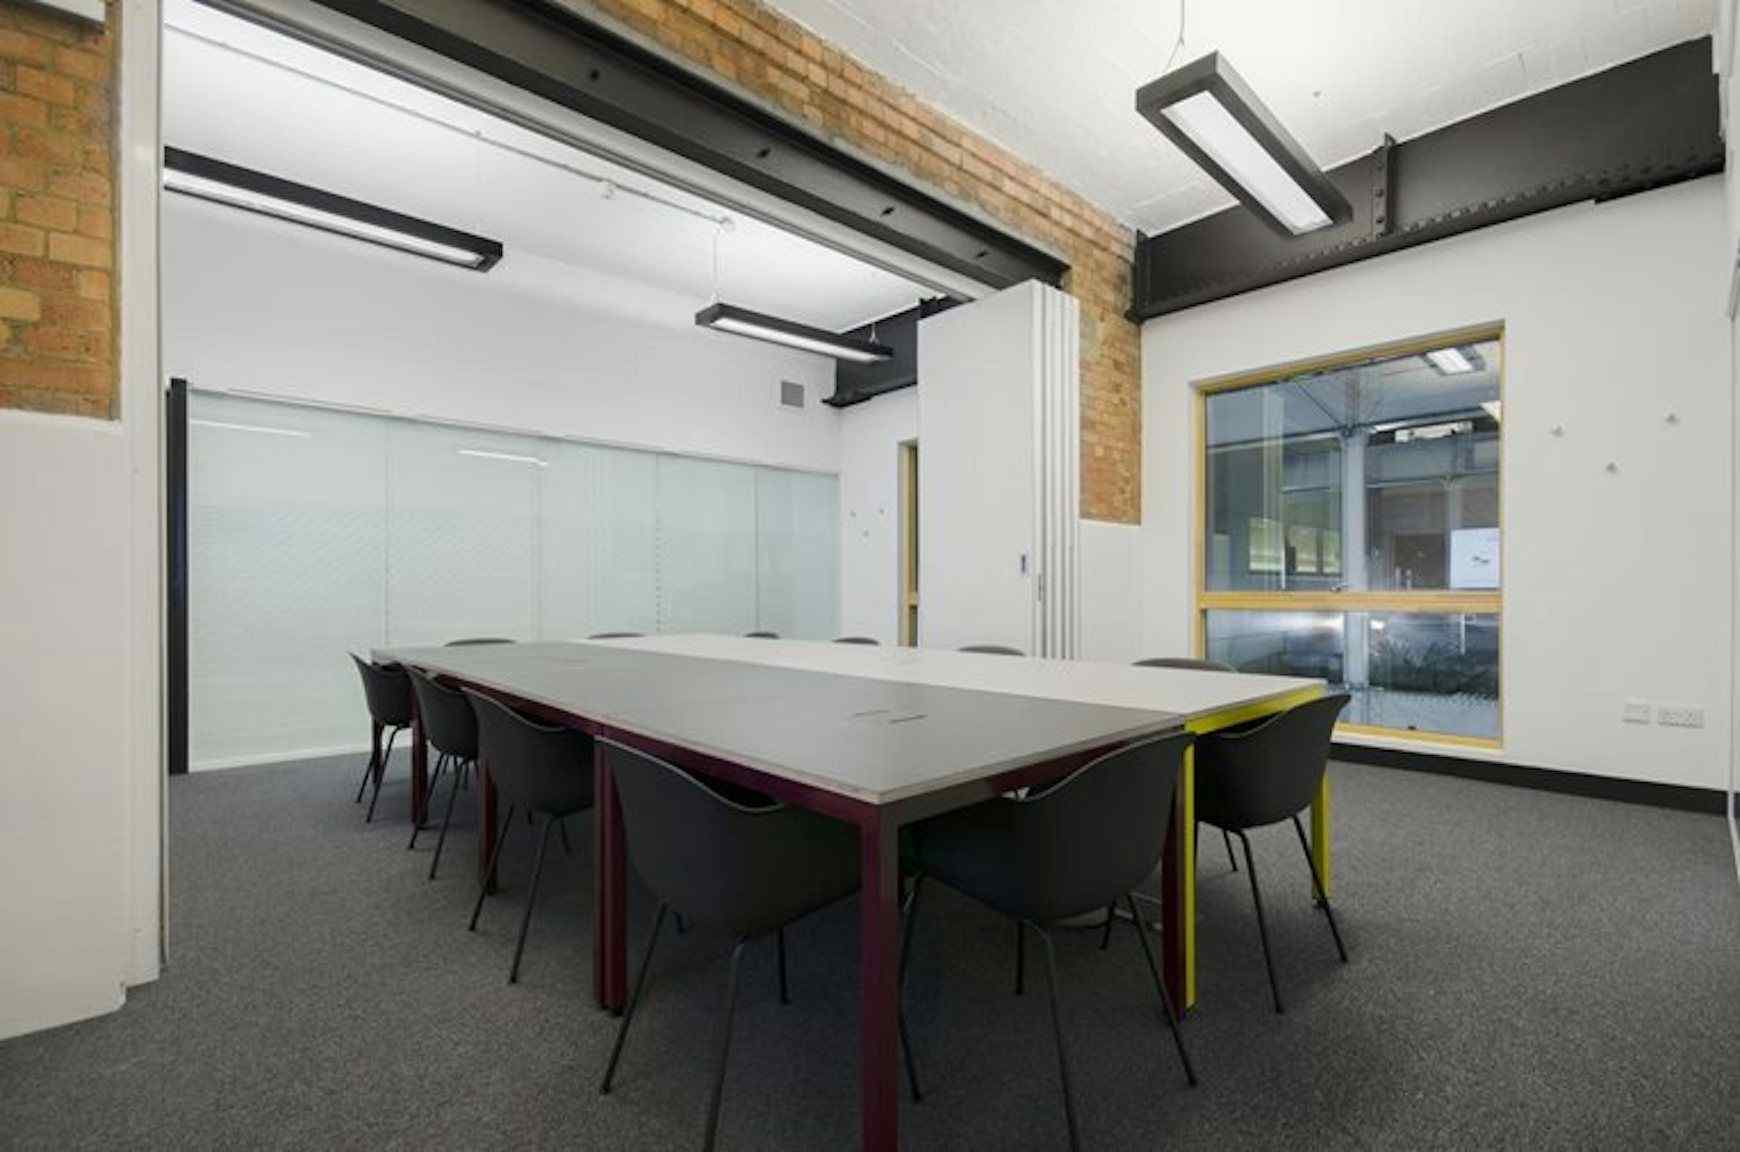 Booked and Journey combined - Chester House, Workspace Kennington Park